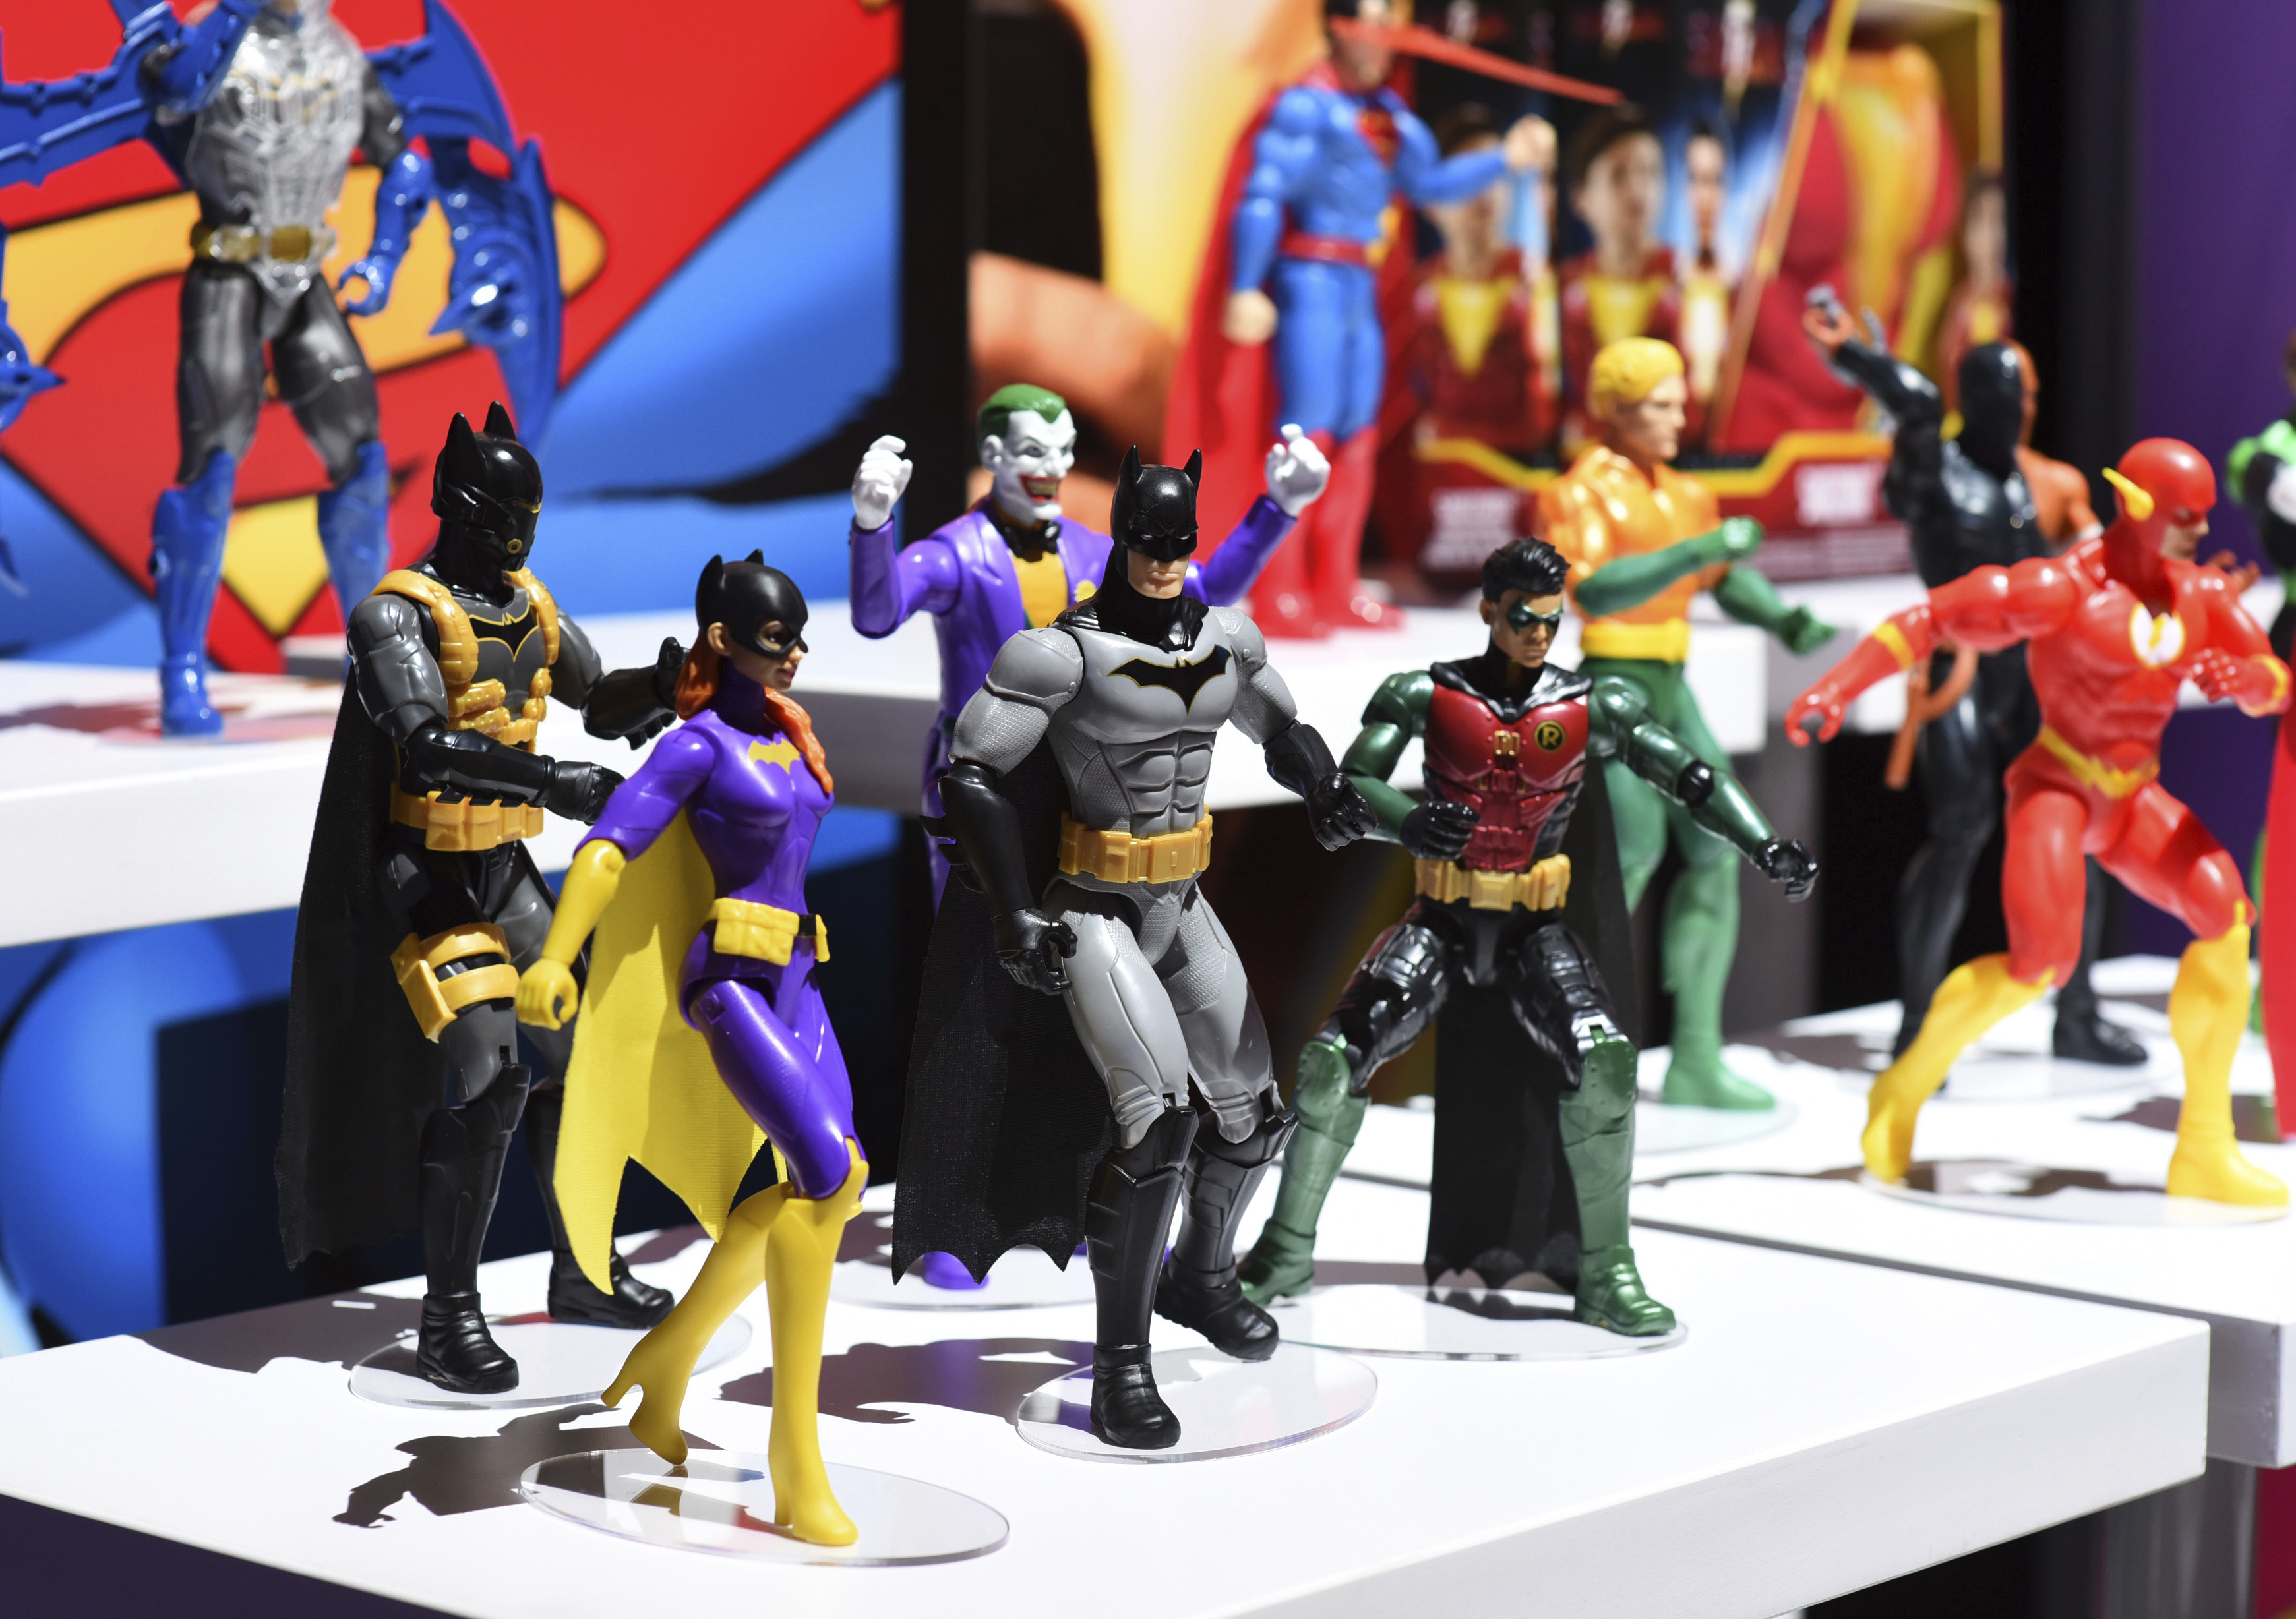 Mattel, in partnership with Warner Bros., introduces the newest Batman line to celebrate the 80th anniversary at the New York Toy Fair, Friday, Feb. 15, 2019. (Diane Bondareff/AP Images for Mattel)